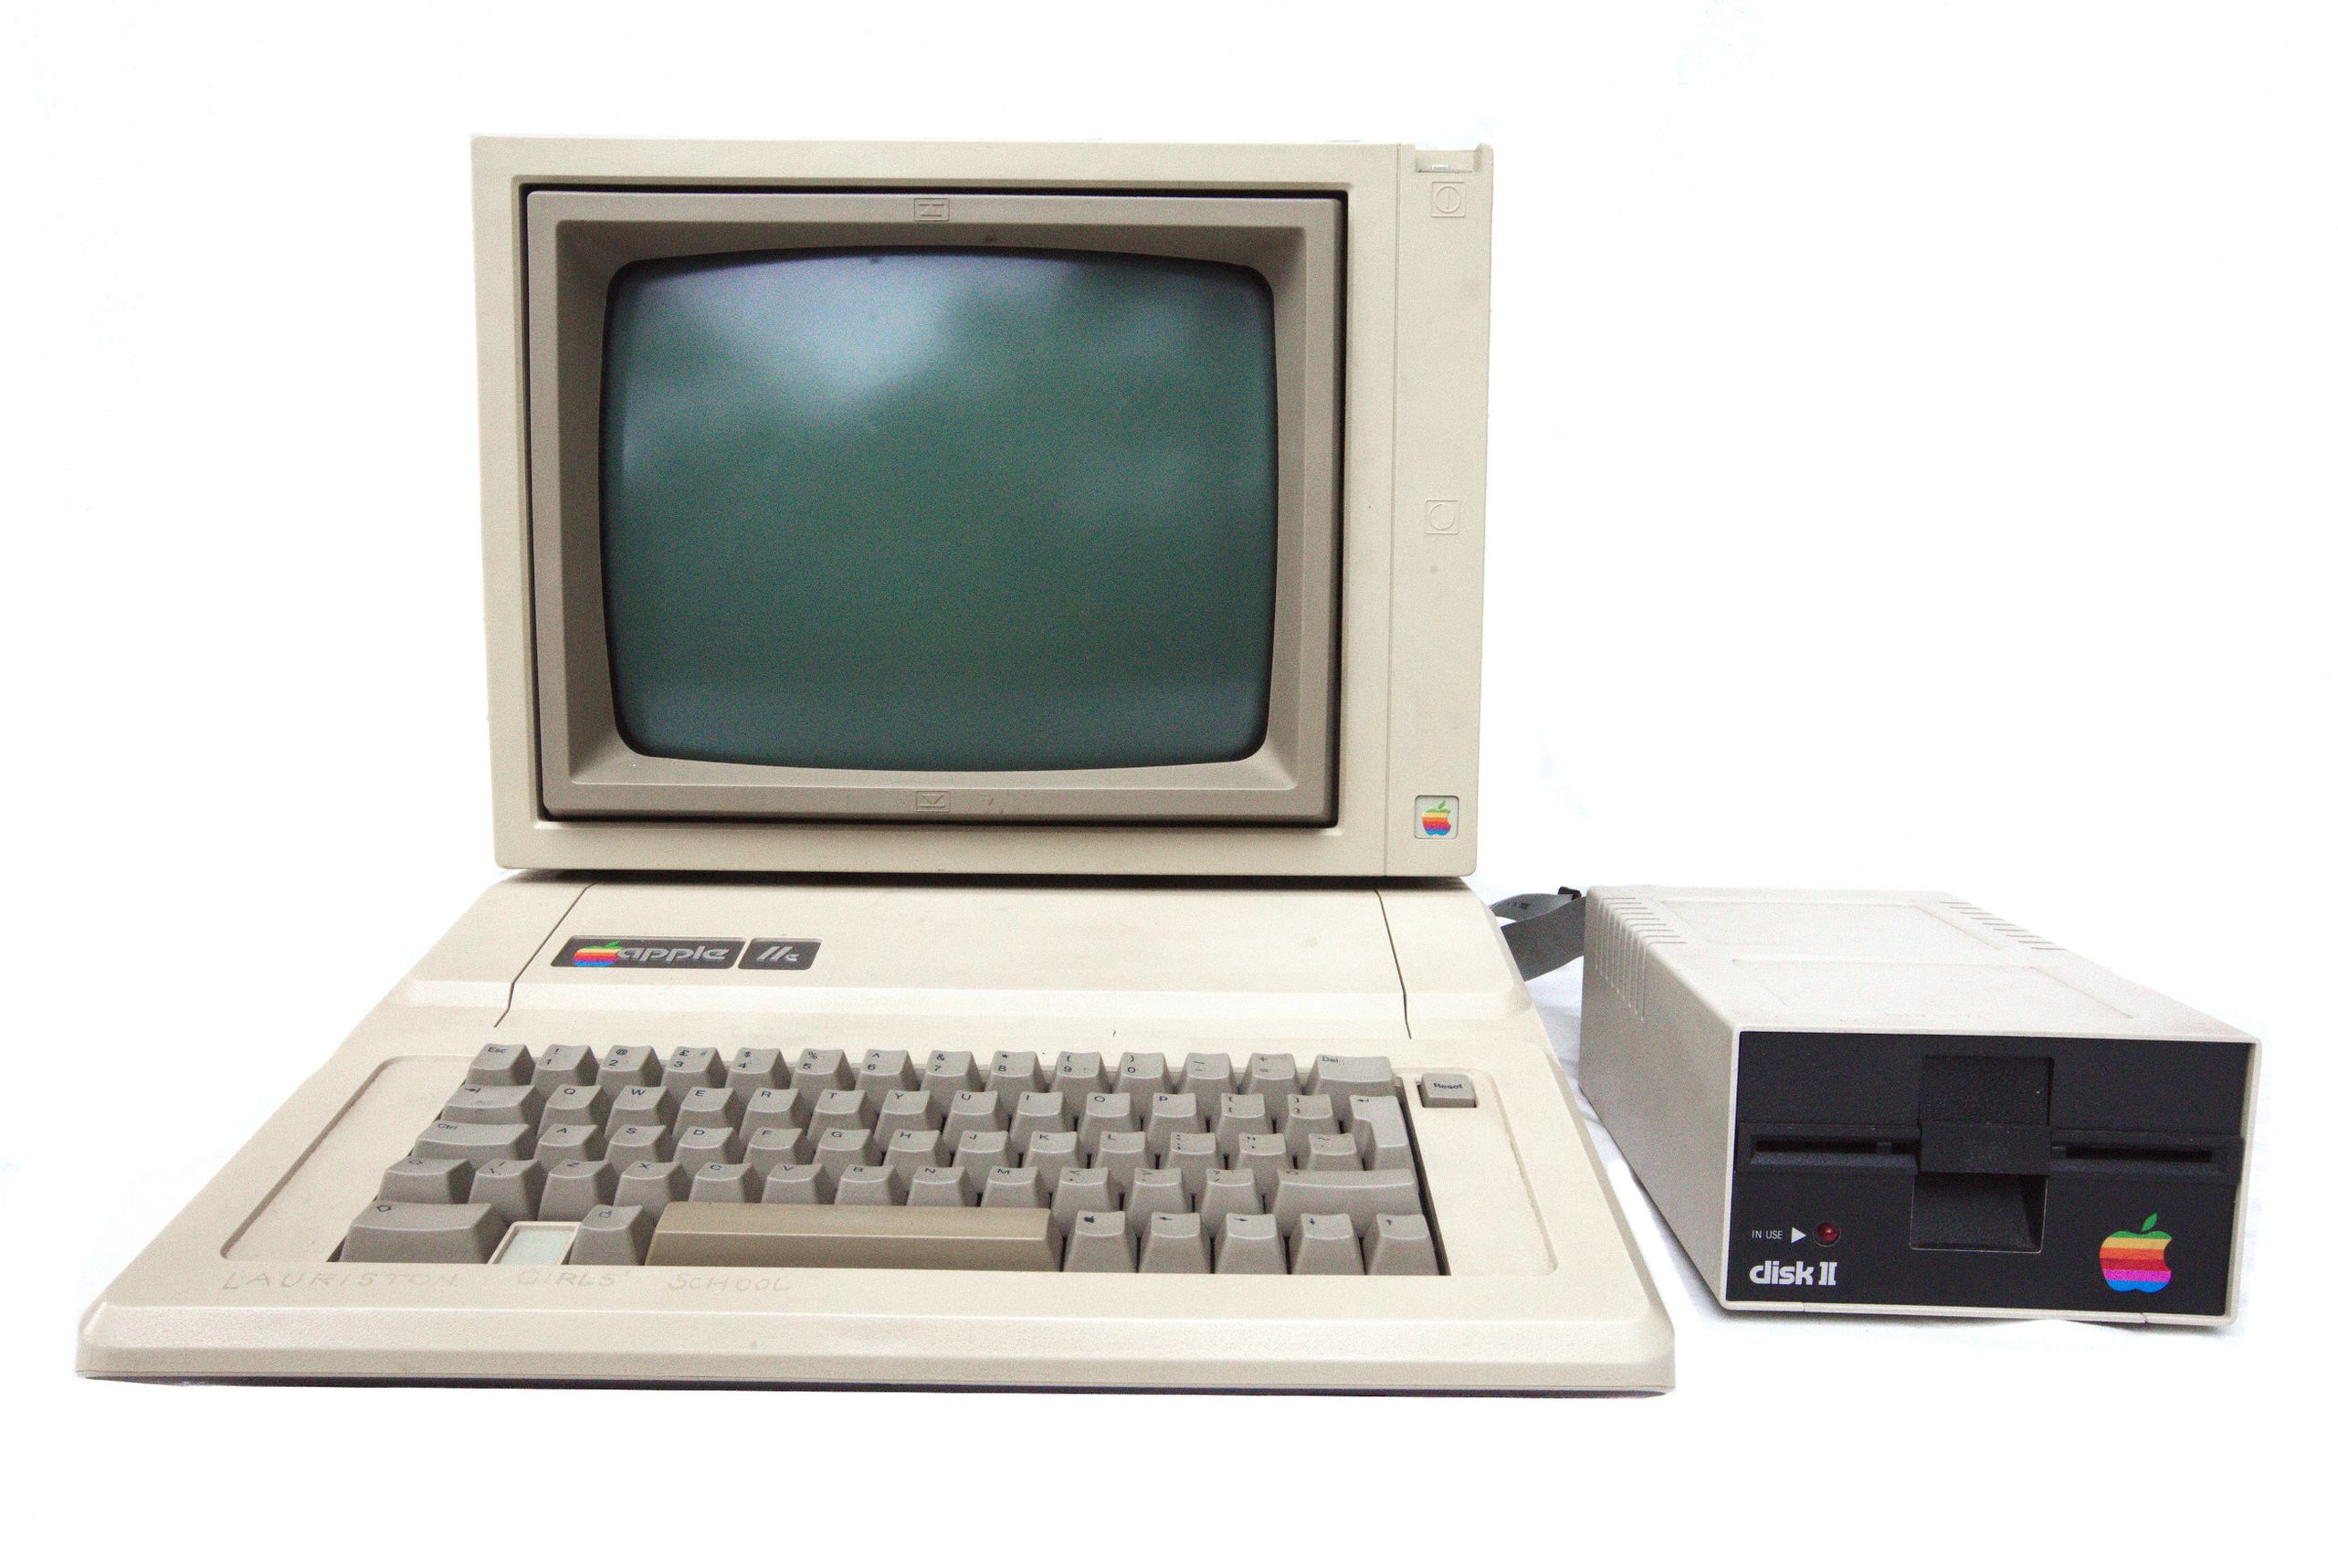 Apple IIe with one floppy drive and Apple's green monochrome monitor.